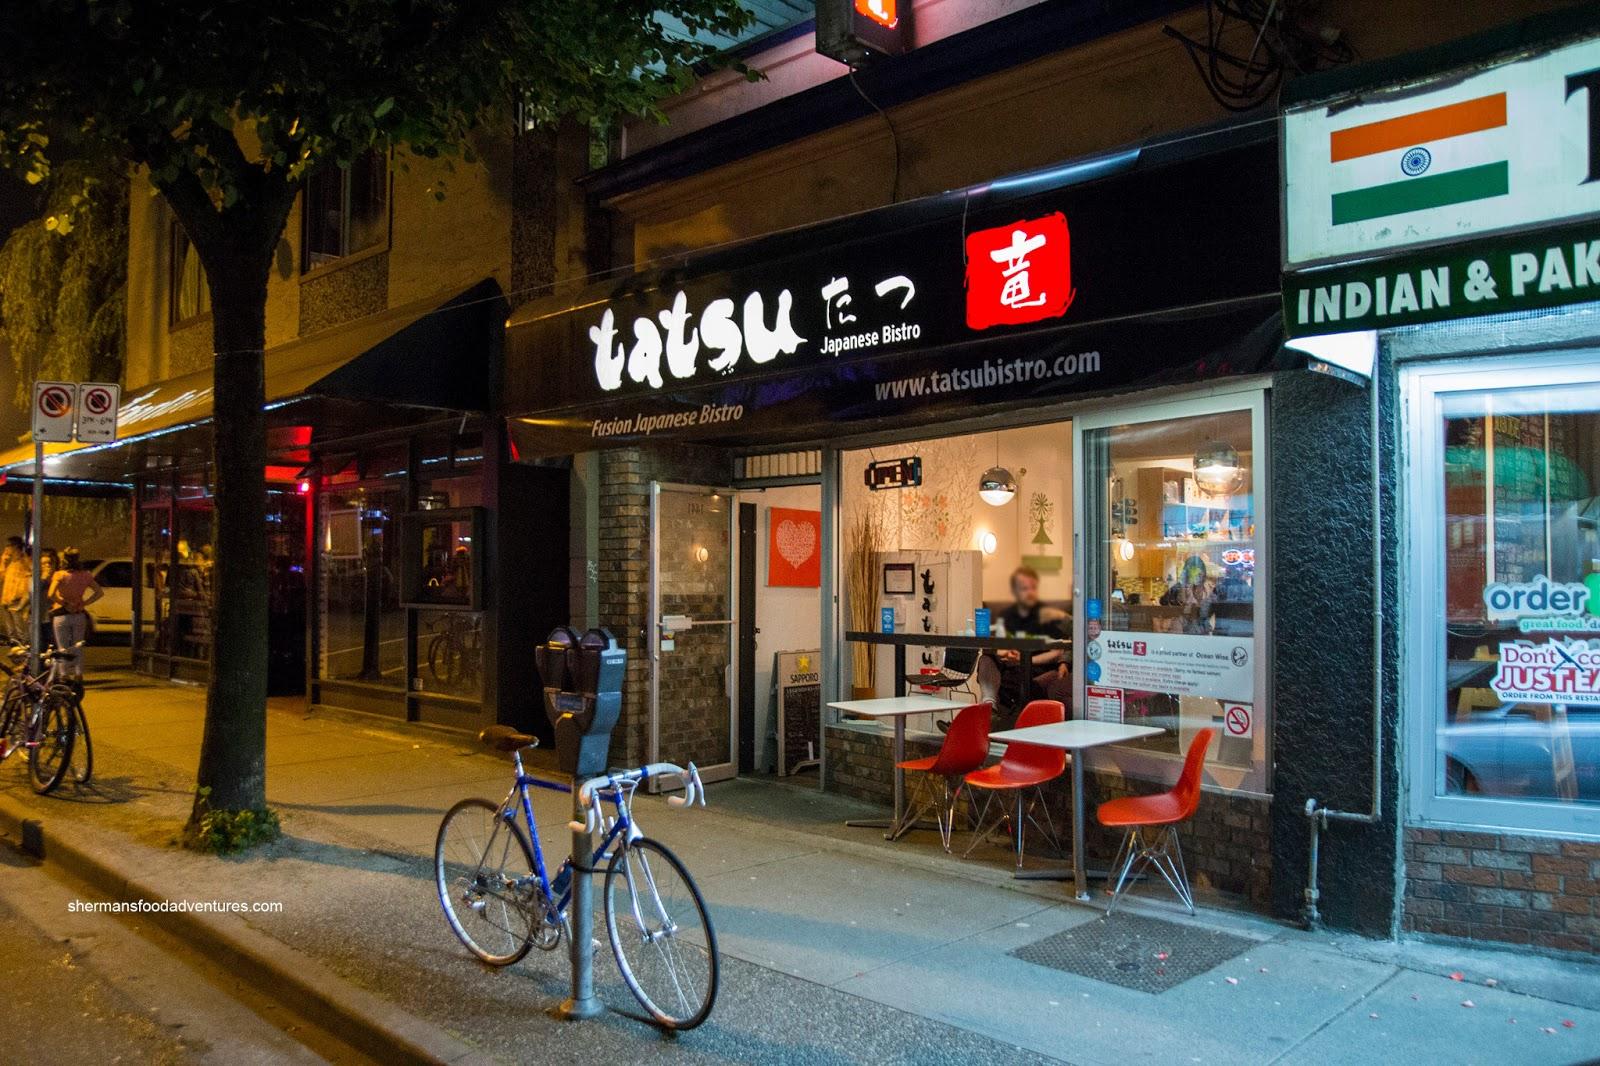 Cover image of this place Tatsu Japanese Bistro